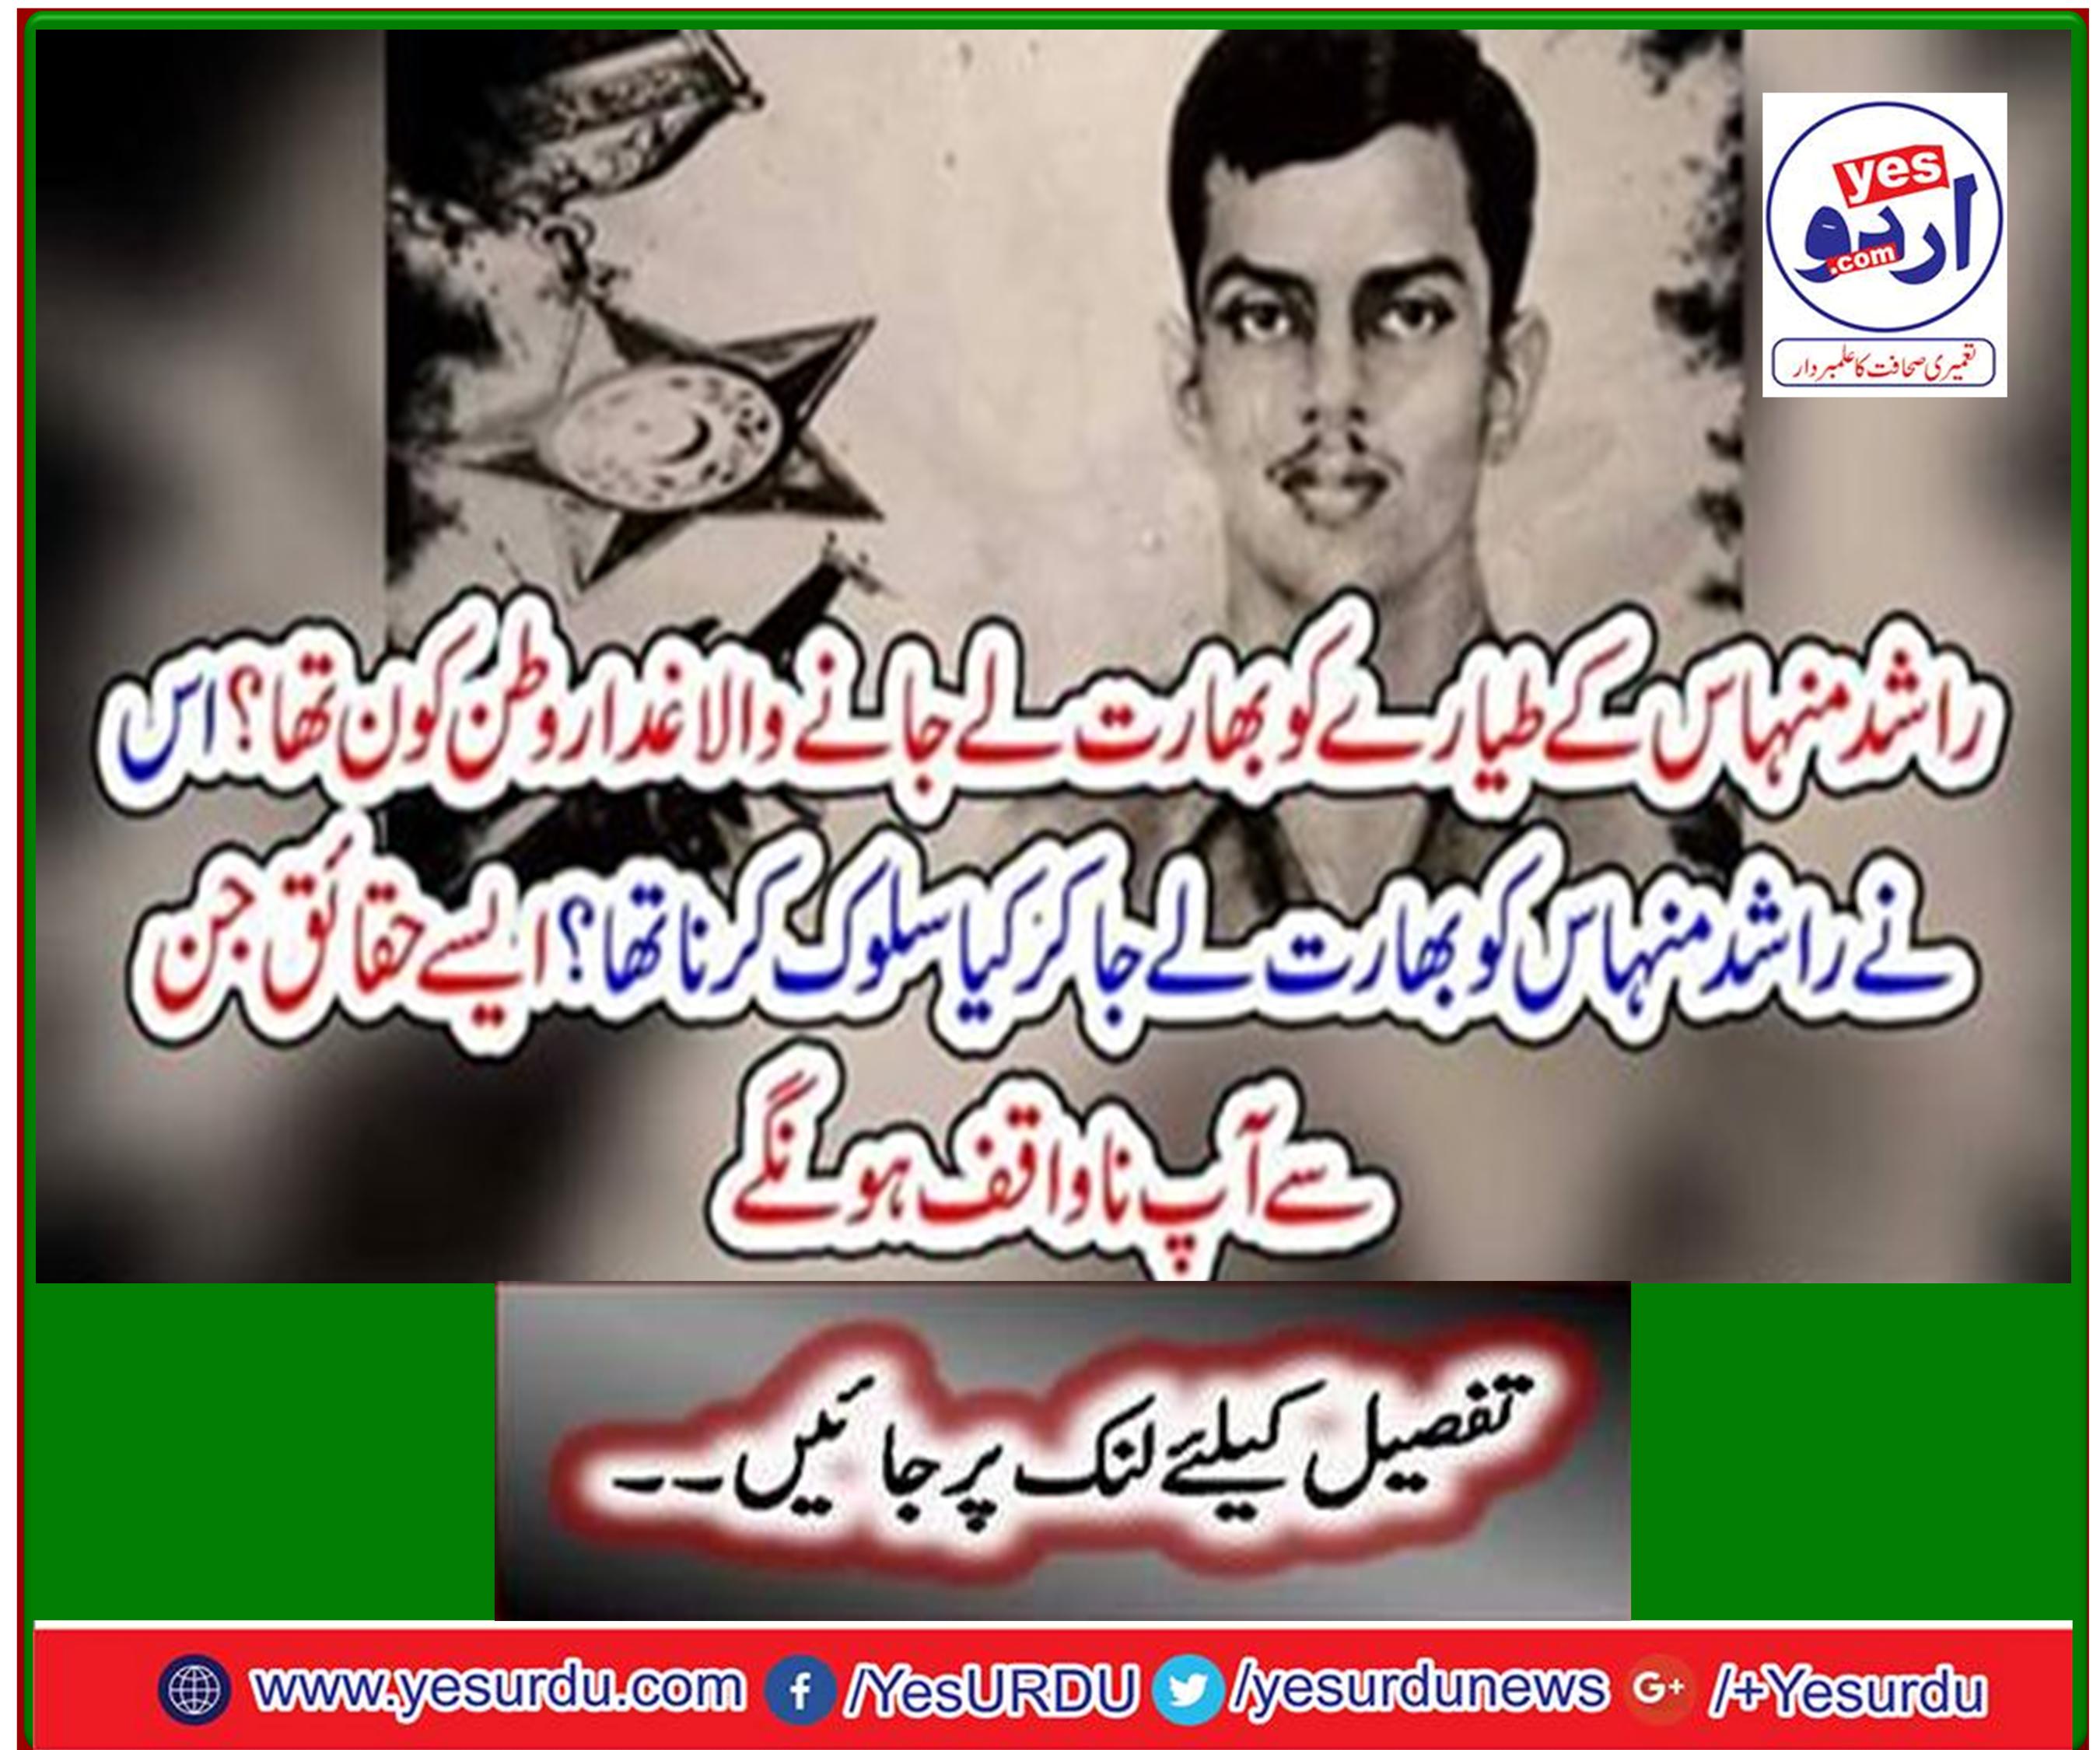 Who was the traitor to Rashid Minhas' flight to India? How did he take Rashid Minhas to India? Facts you may be unfamiliar with